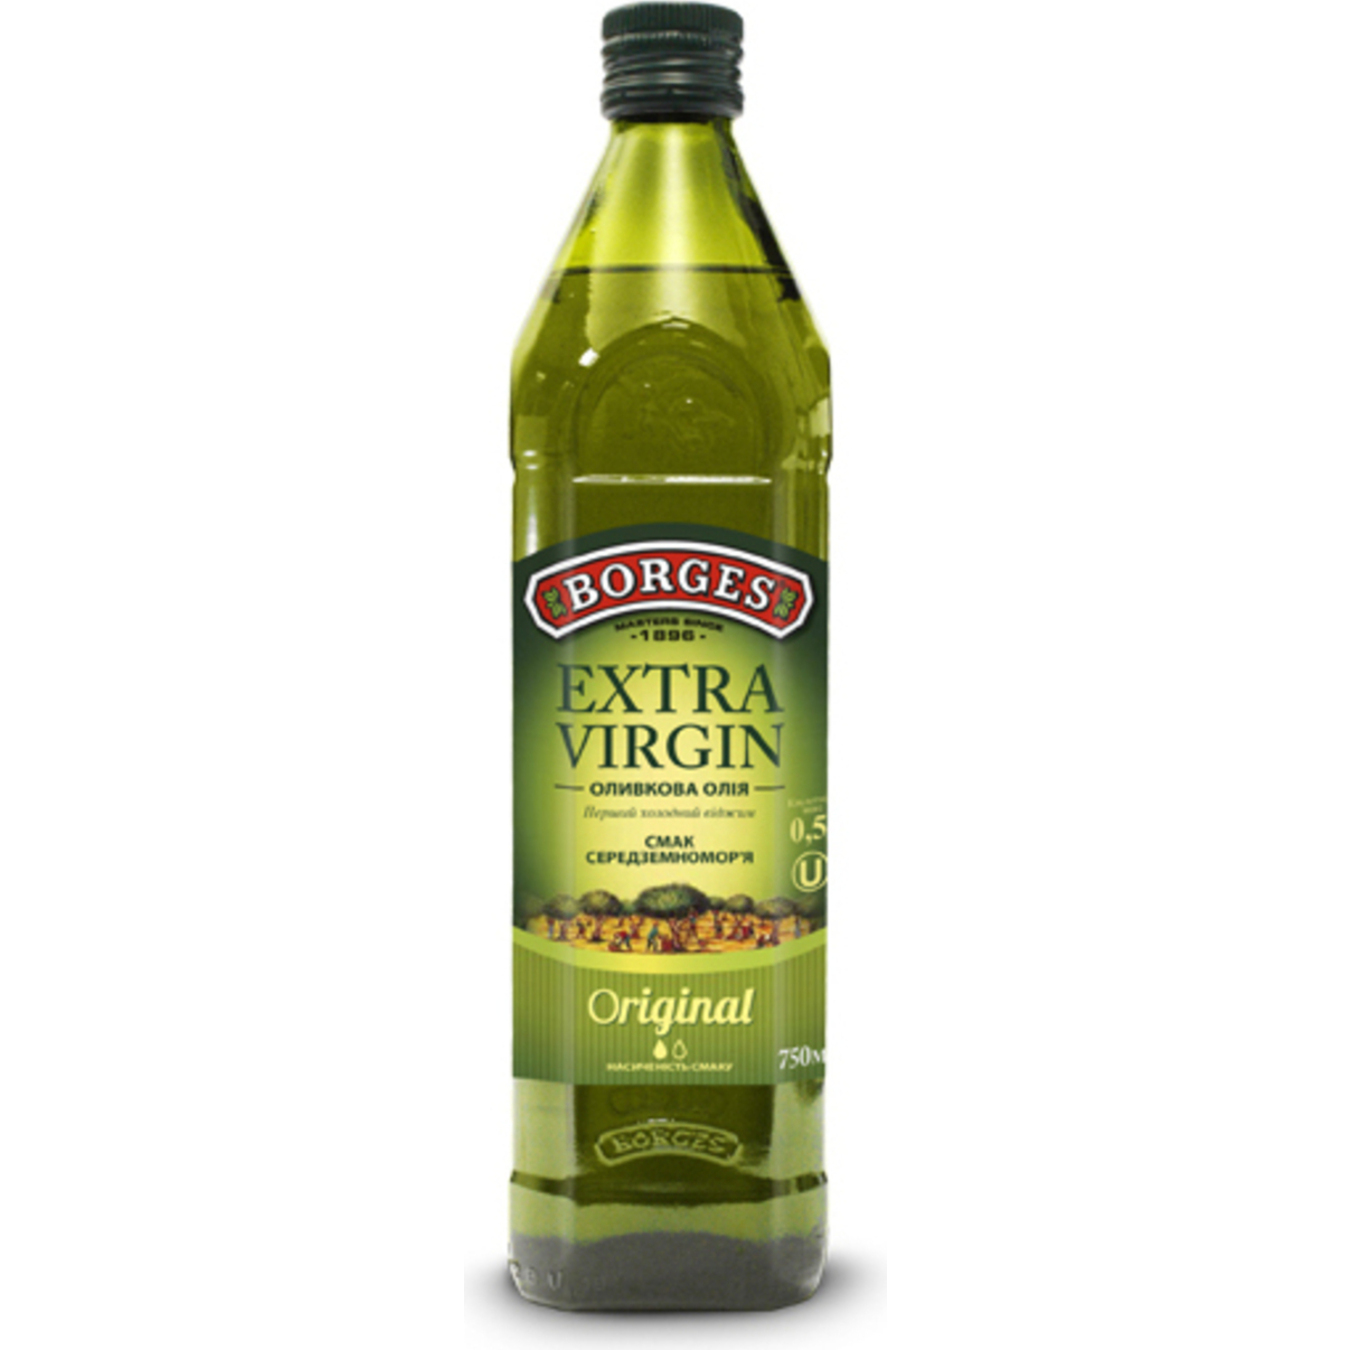 Borges Extra Virgin Olive Oil 750ml glass